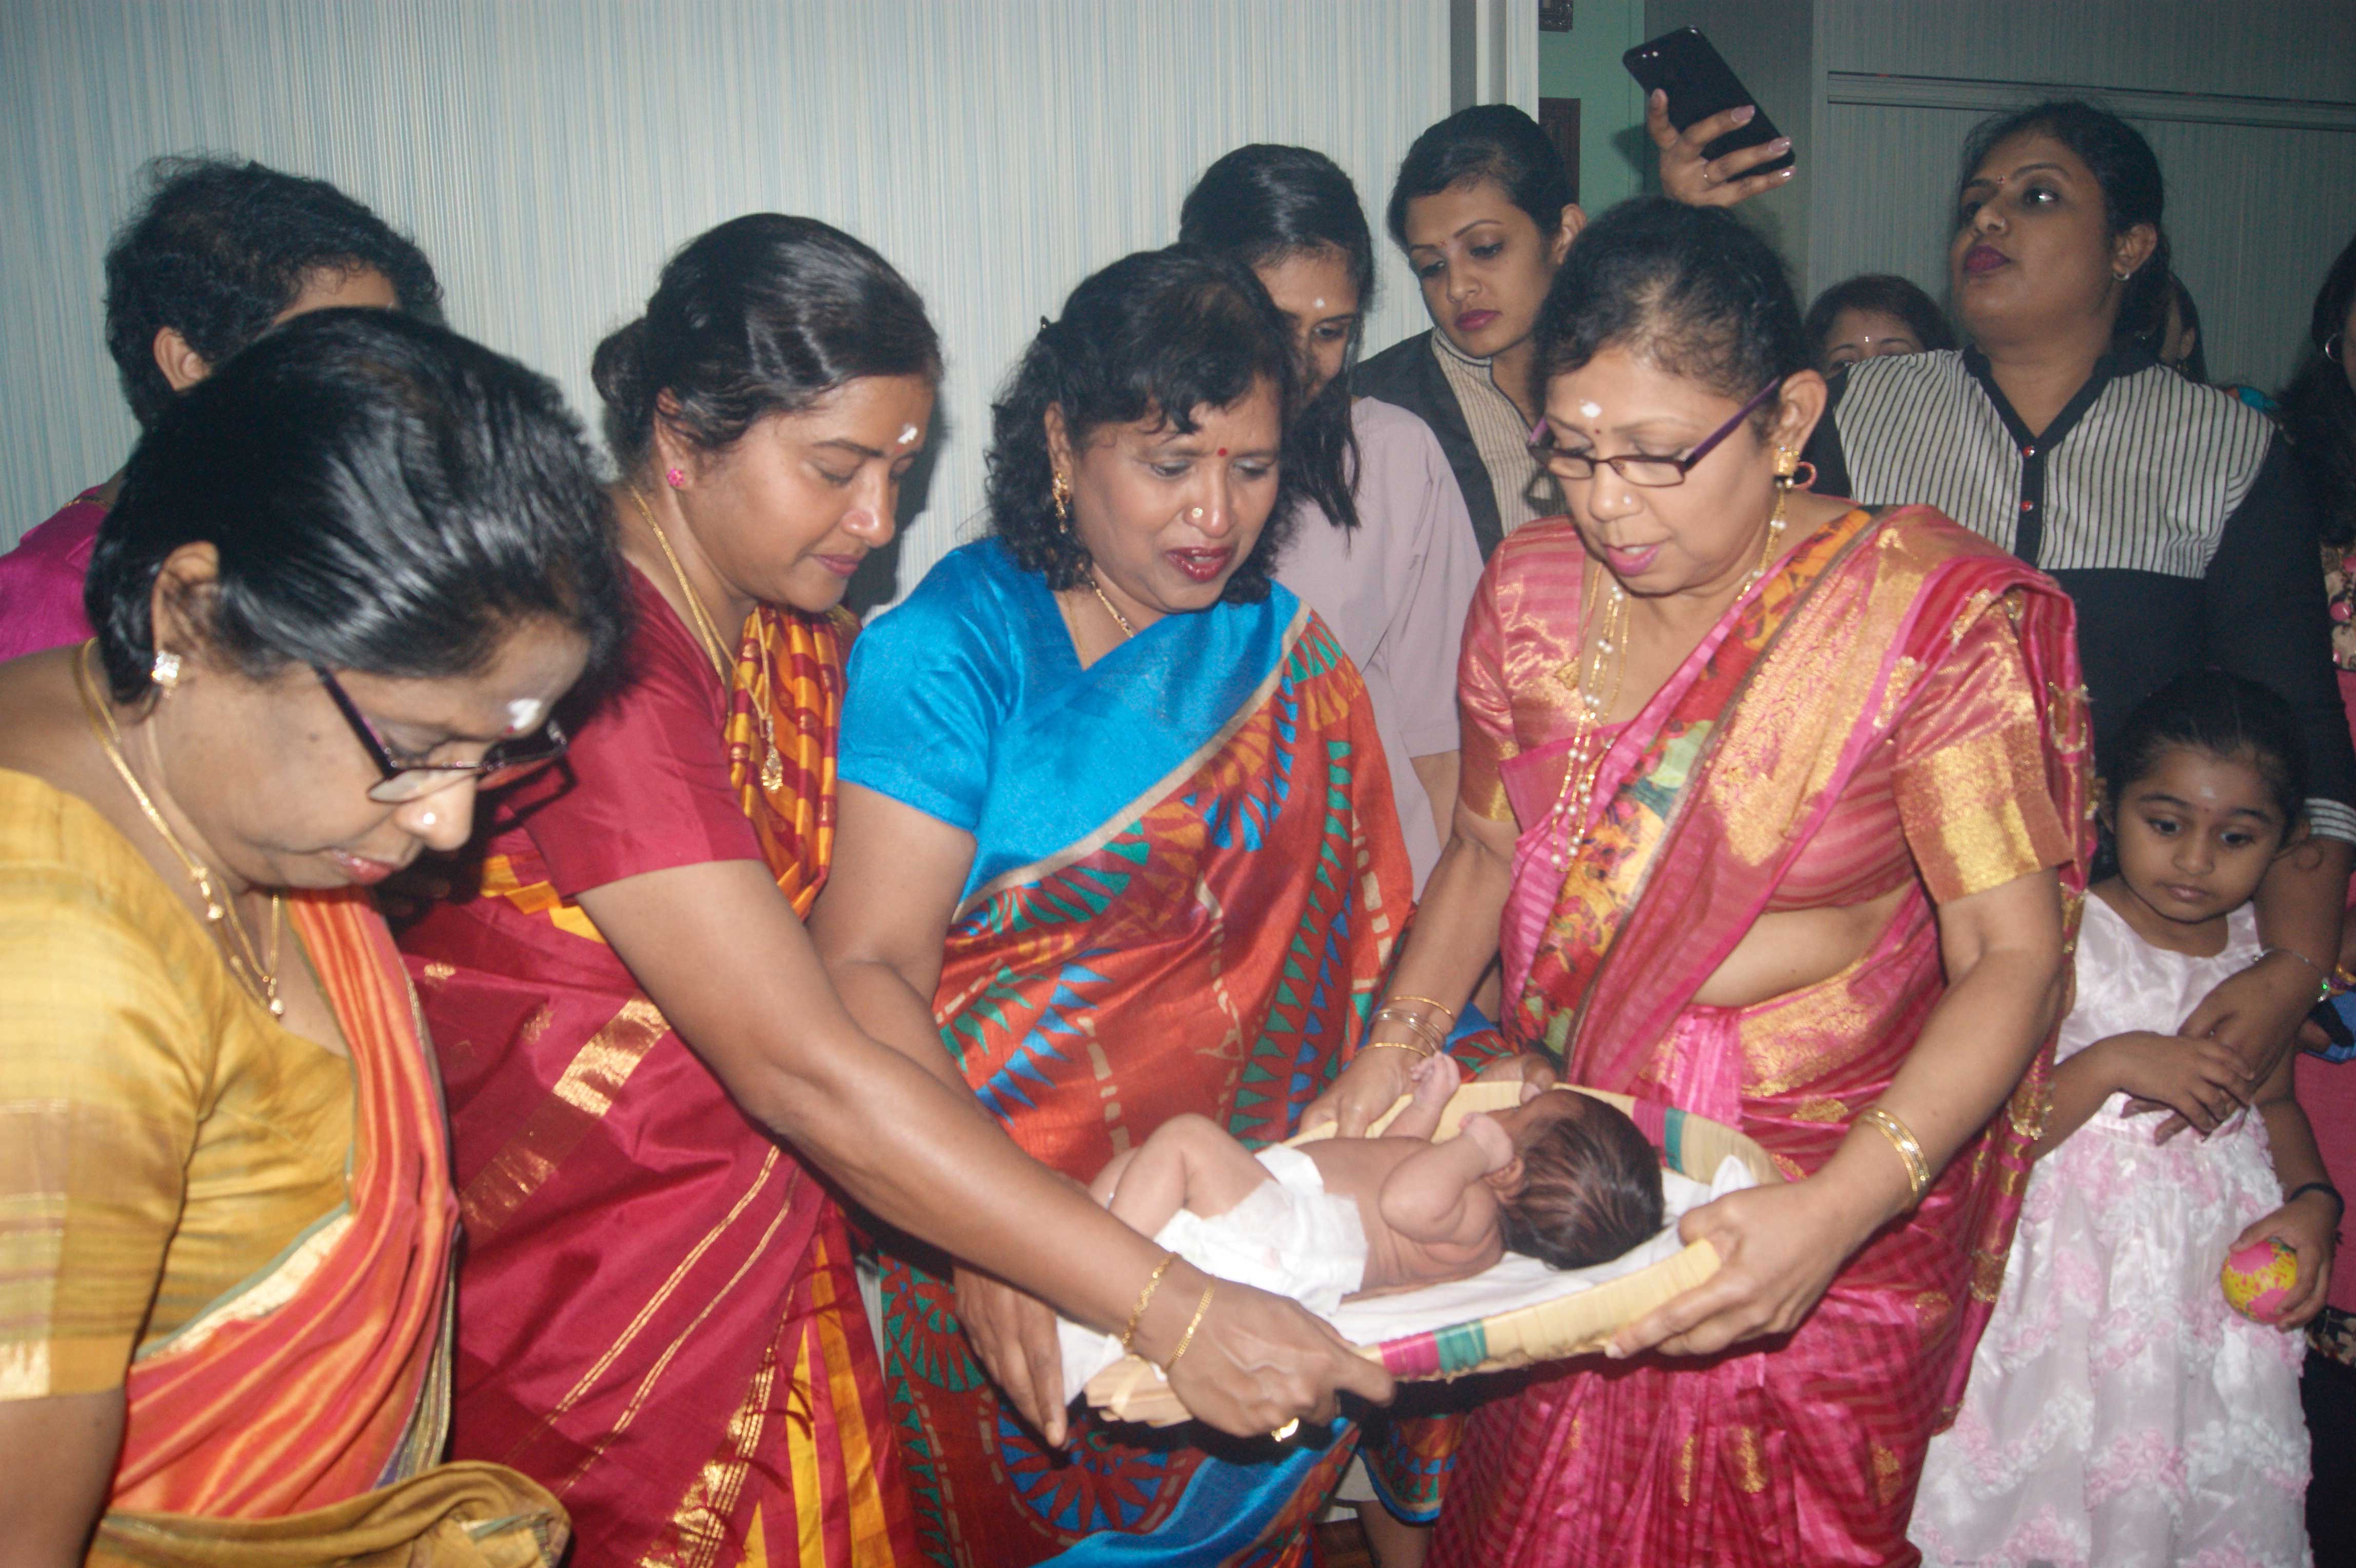 The baby being blessed by her grandmother and grandaunts during the prayer ceremony to Sri Periyachi Amman.